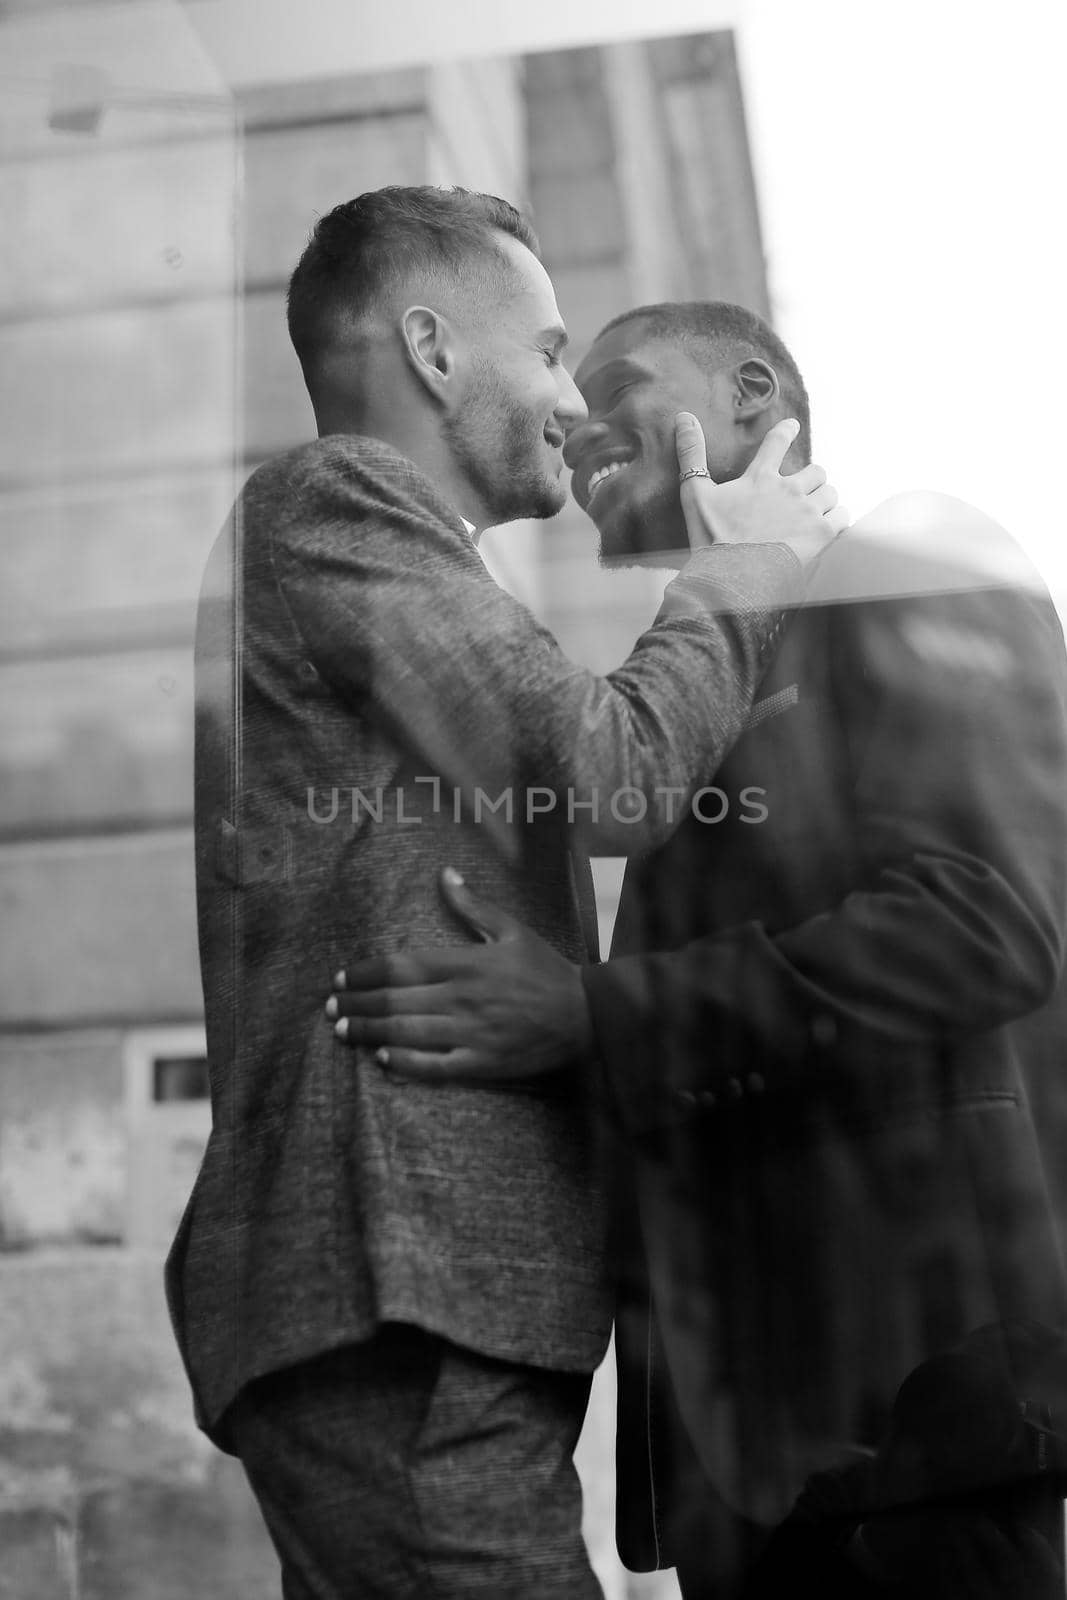 Black and white reflection in window of two happy kissing boys, afro american and caucasian. Concept of gays and lgbt.